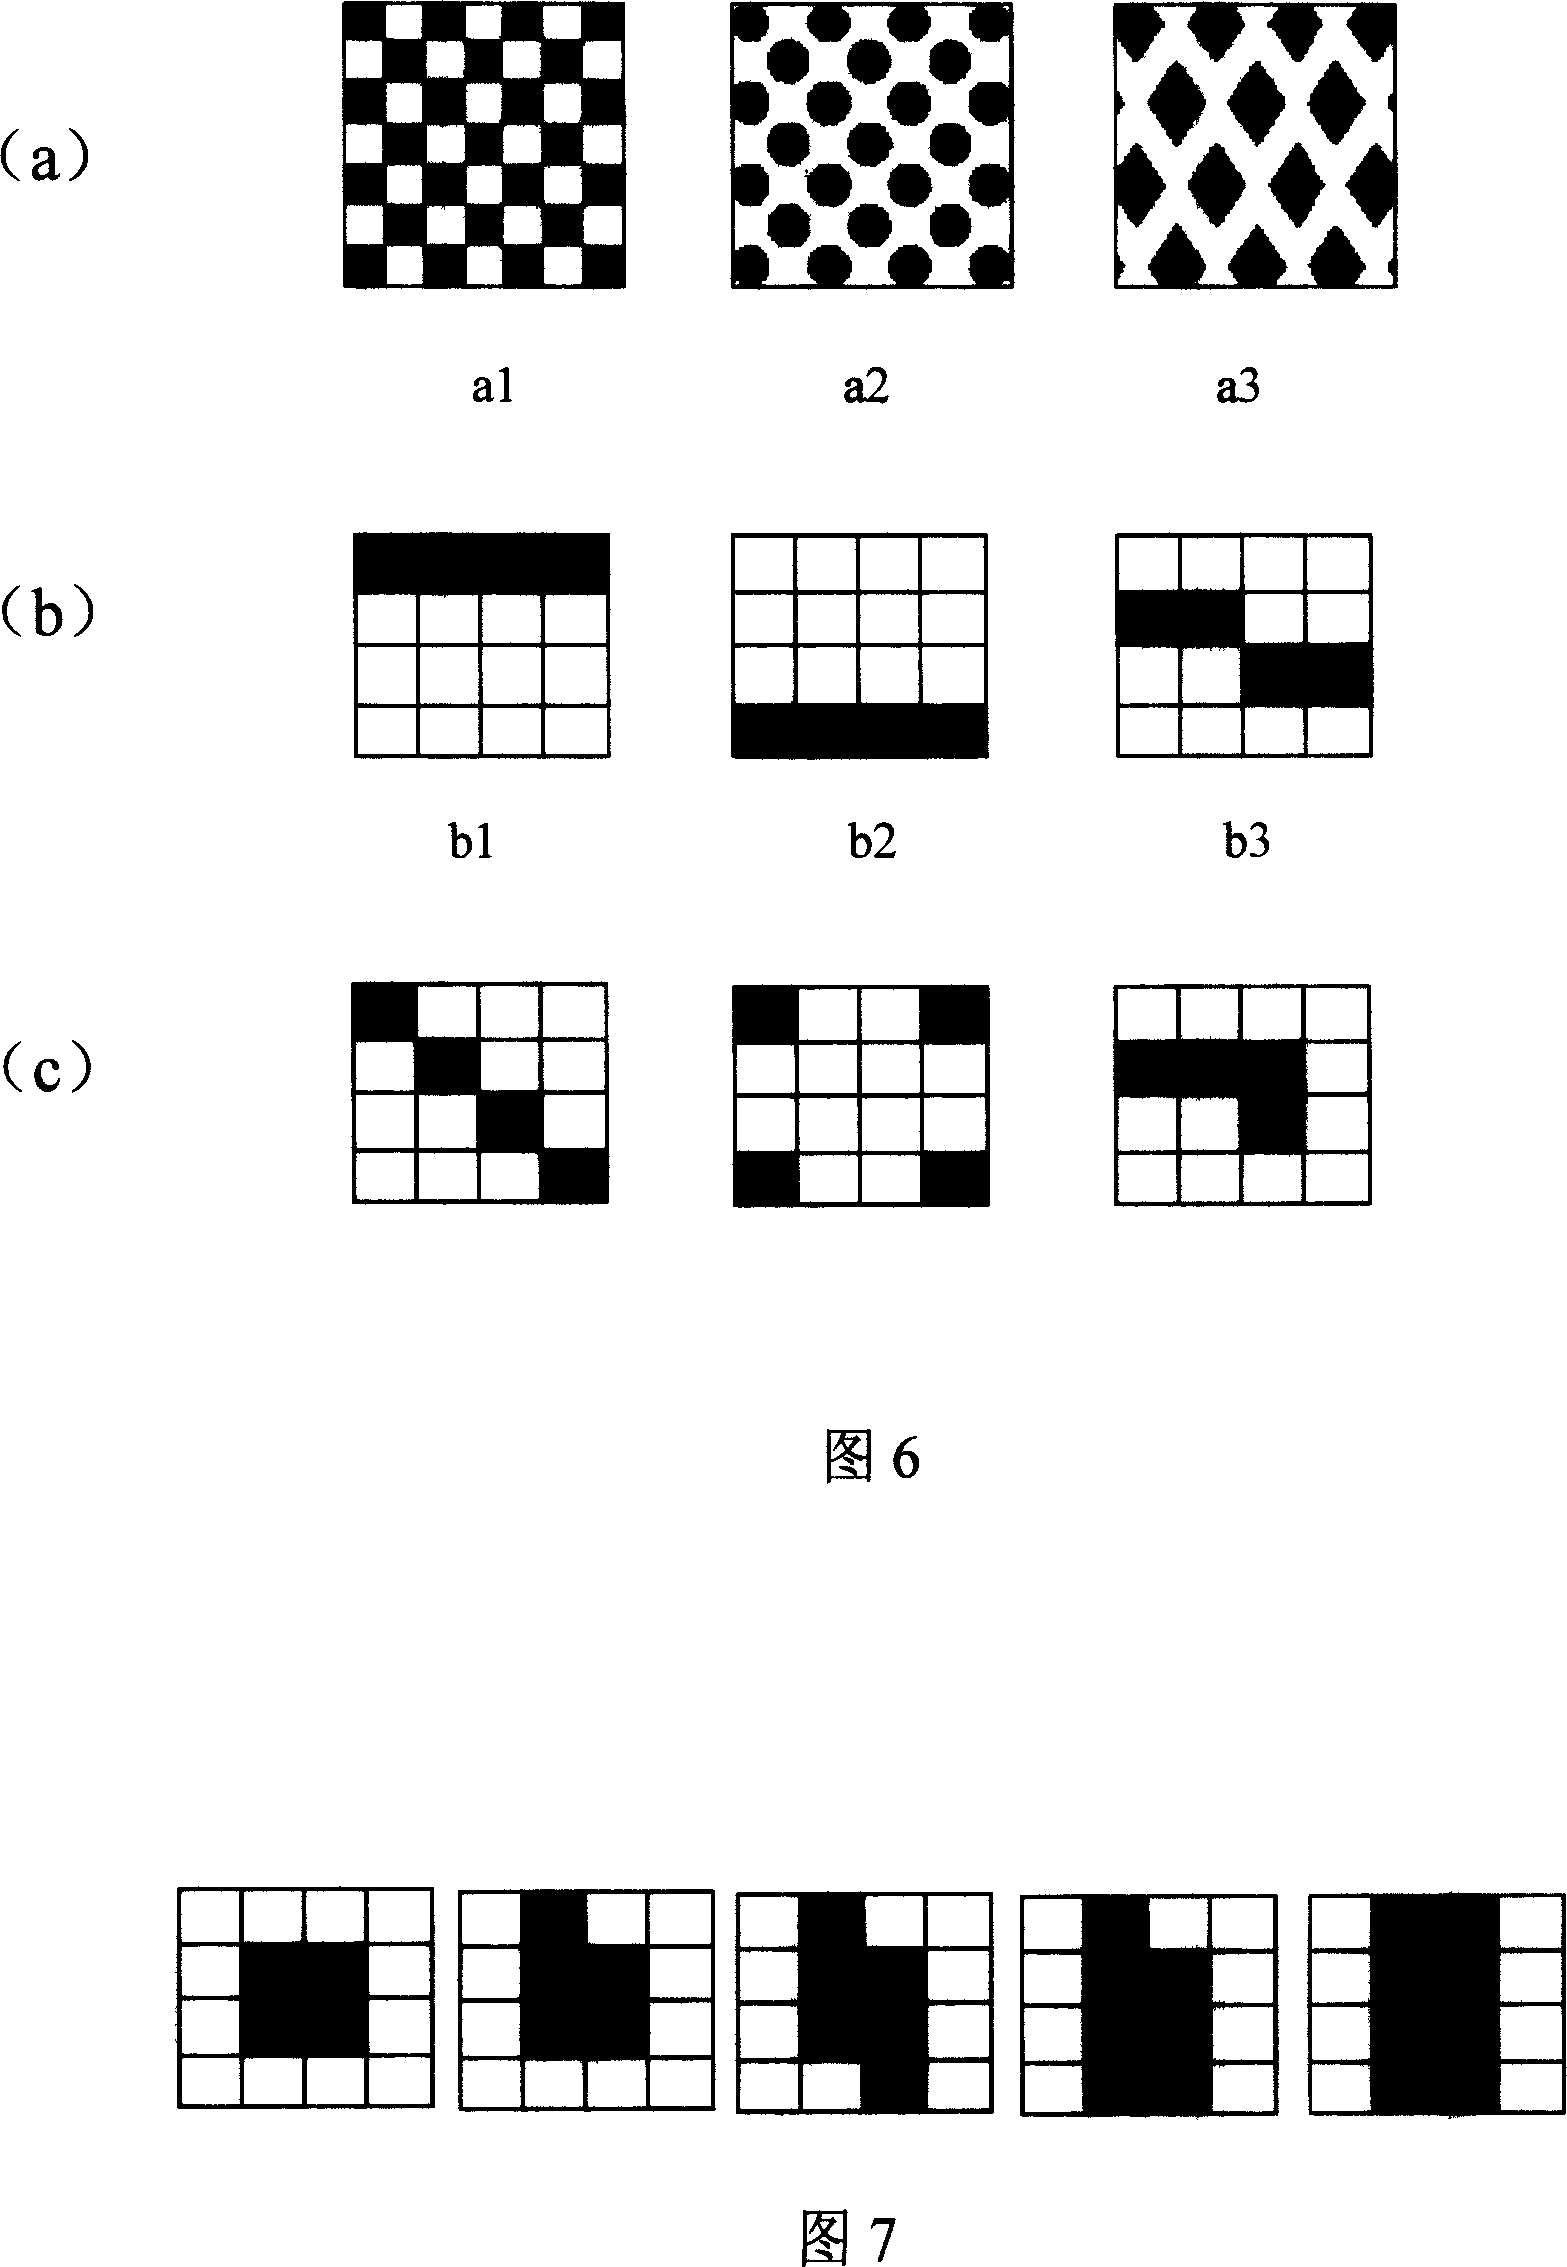 Grey scale image embedded information content analysis method